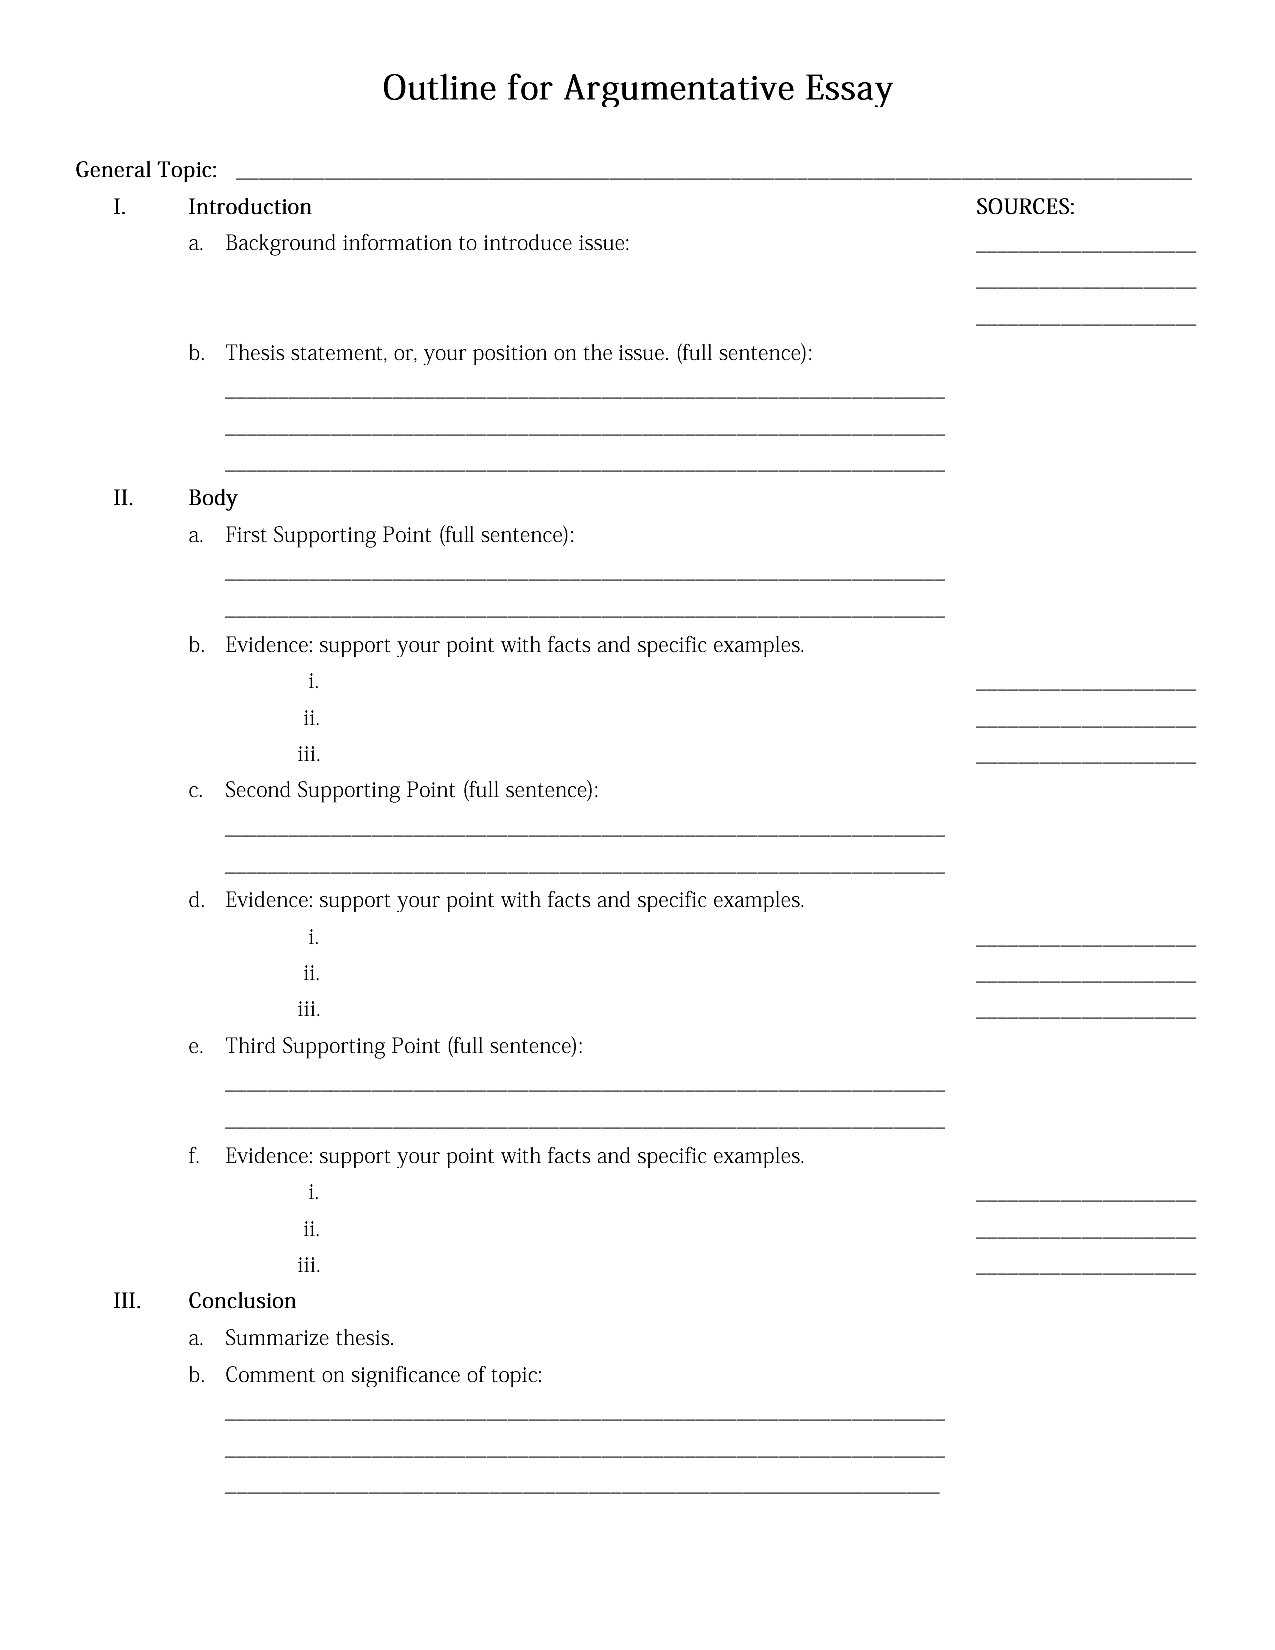 Writing Dialogue Worksheet or Structuring An Essay Essay Writing Template Paper Activities and